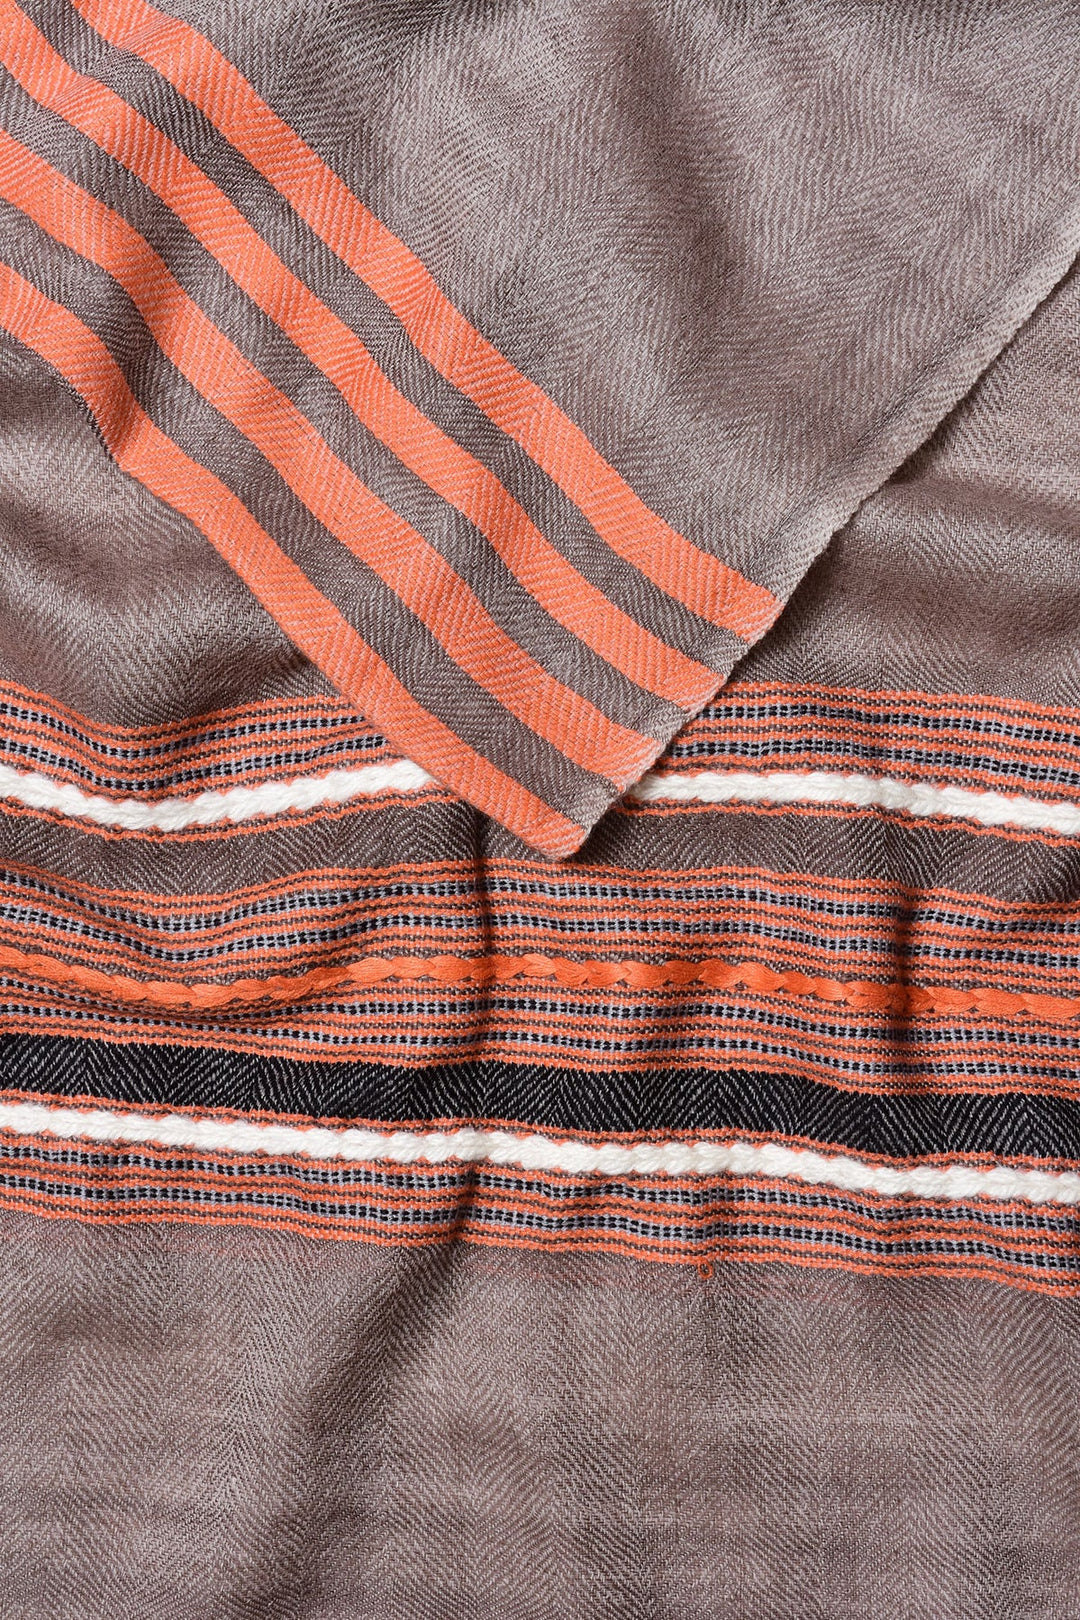 Pashmina Stole: Handwoven with Twill Weave and Hand Embroidery | Fordgo Handwoven Pashmina Stole - Brown Orange White & Black